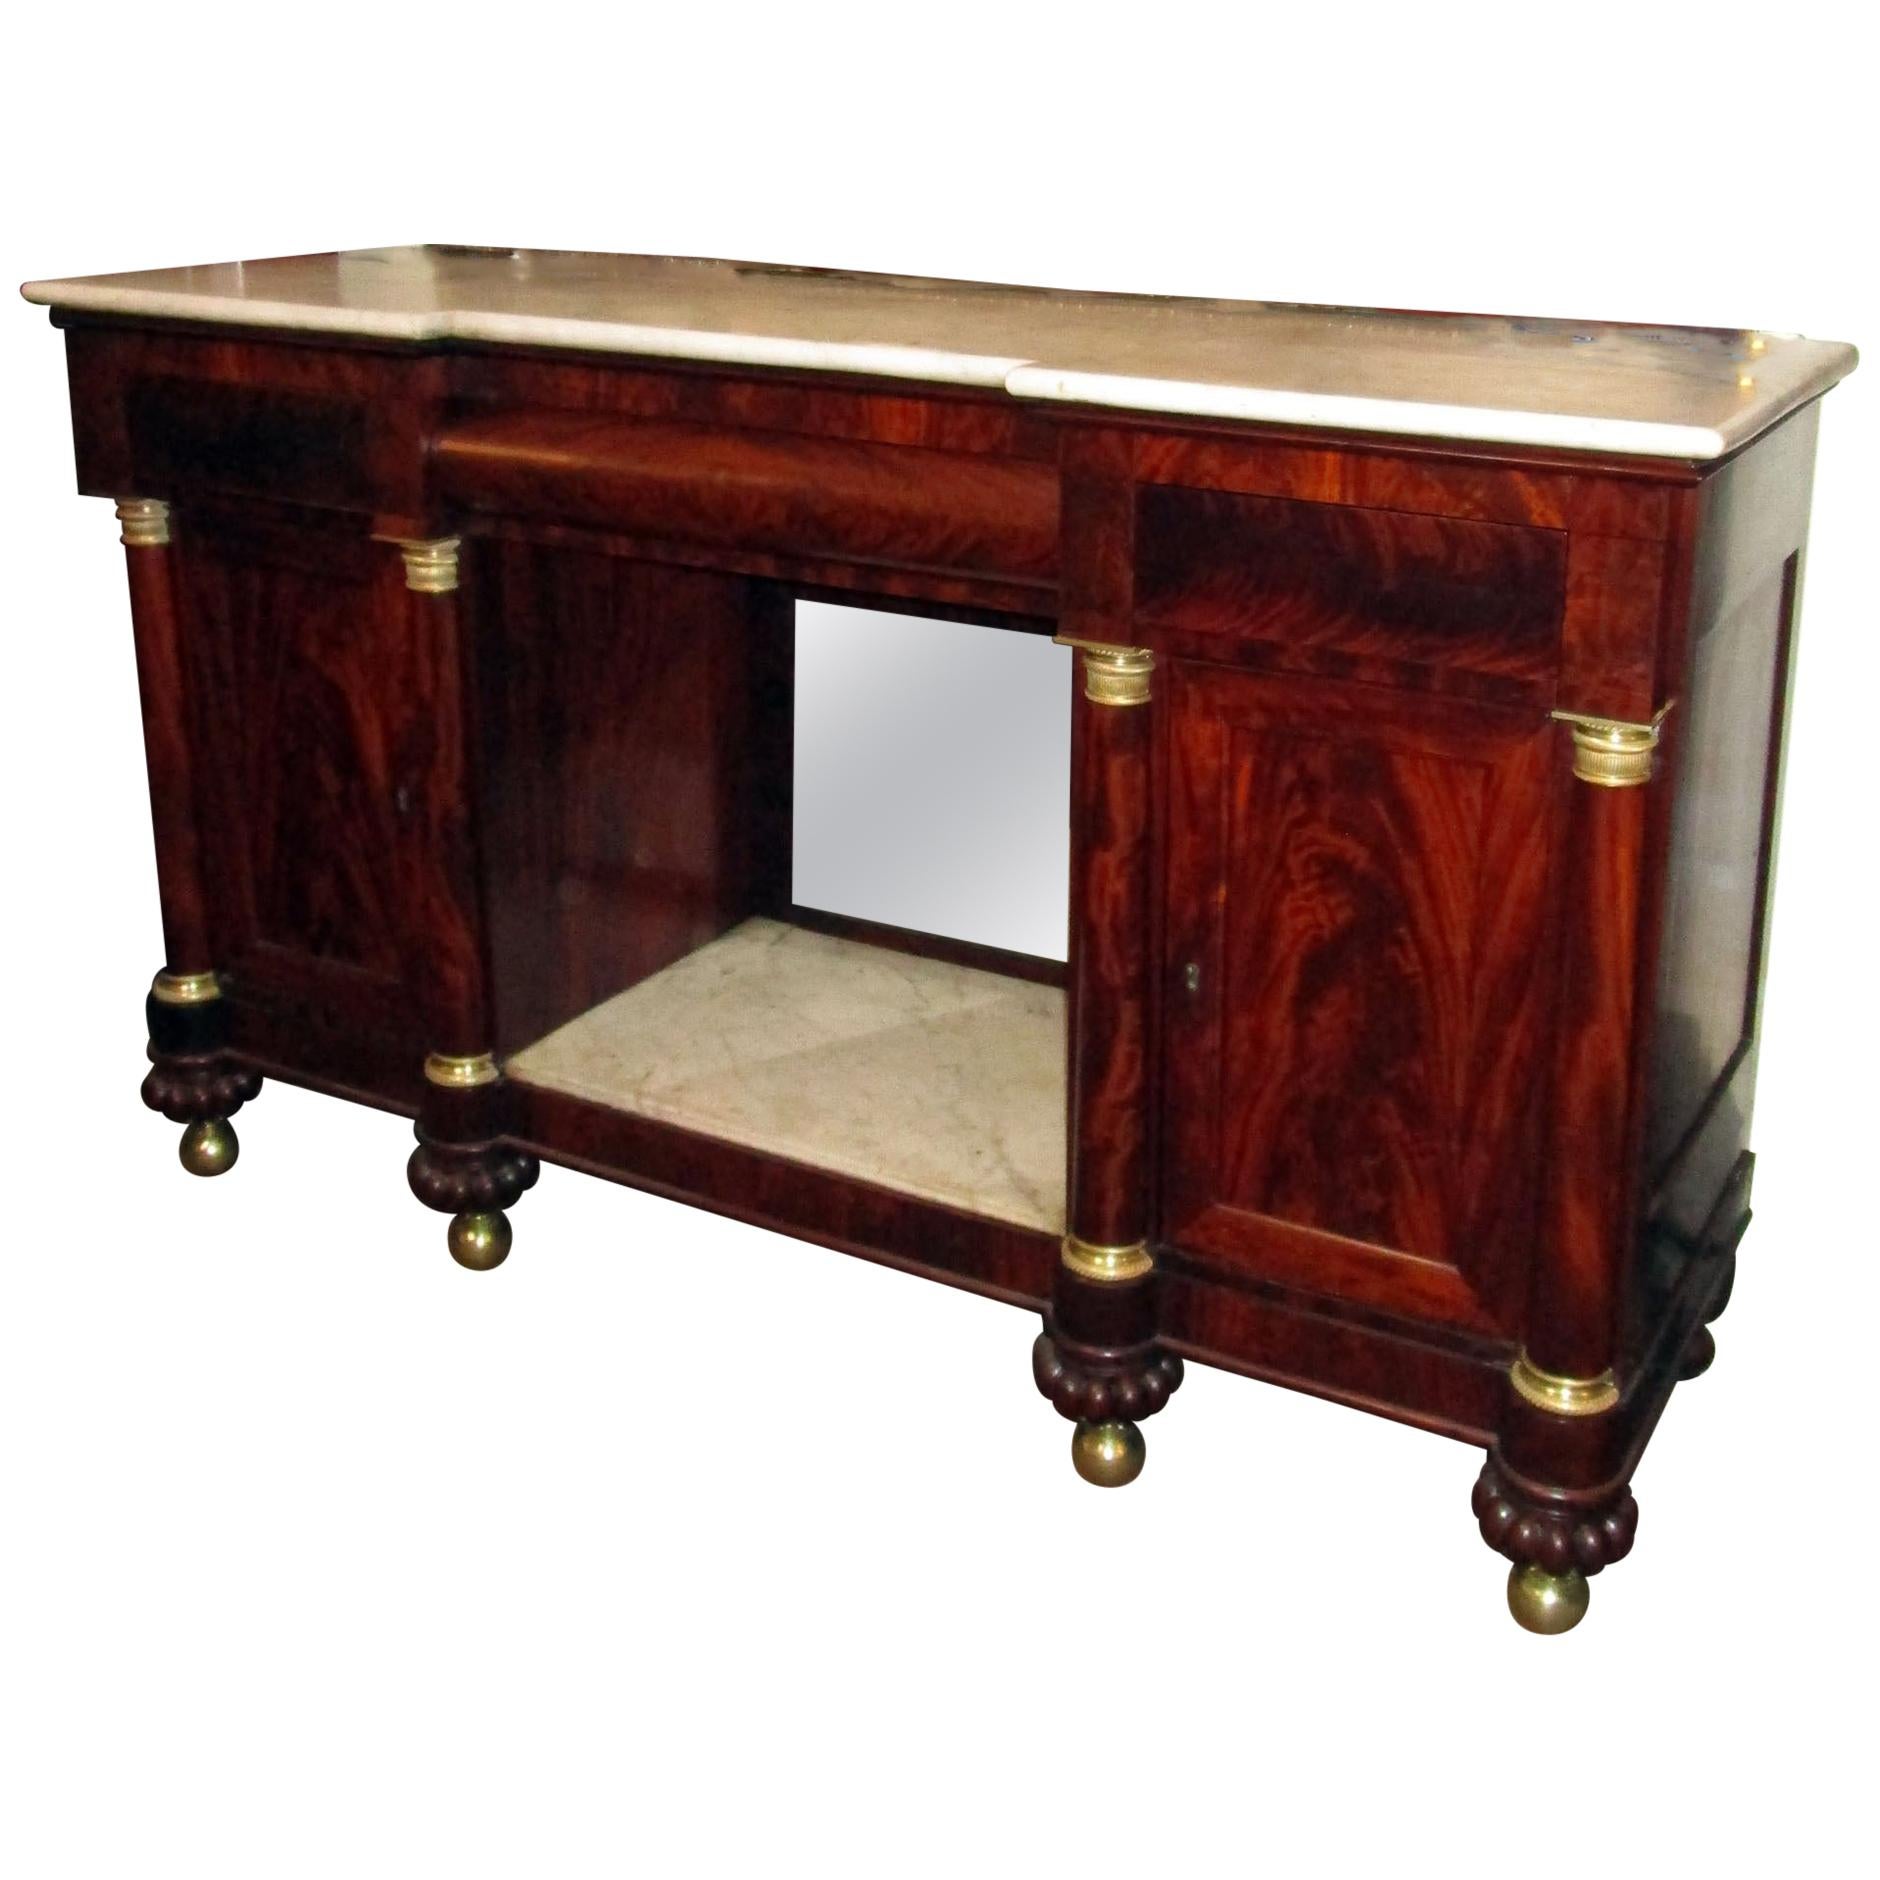 19th Century American Empire Flame Mahogany Sideboard Marble Top and Insert